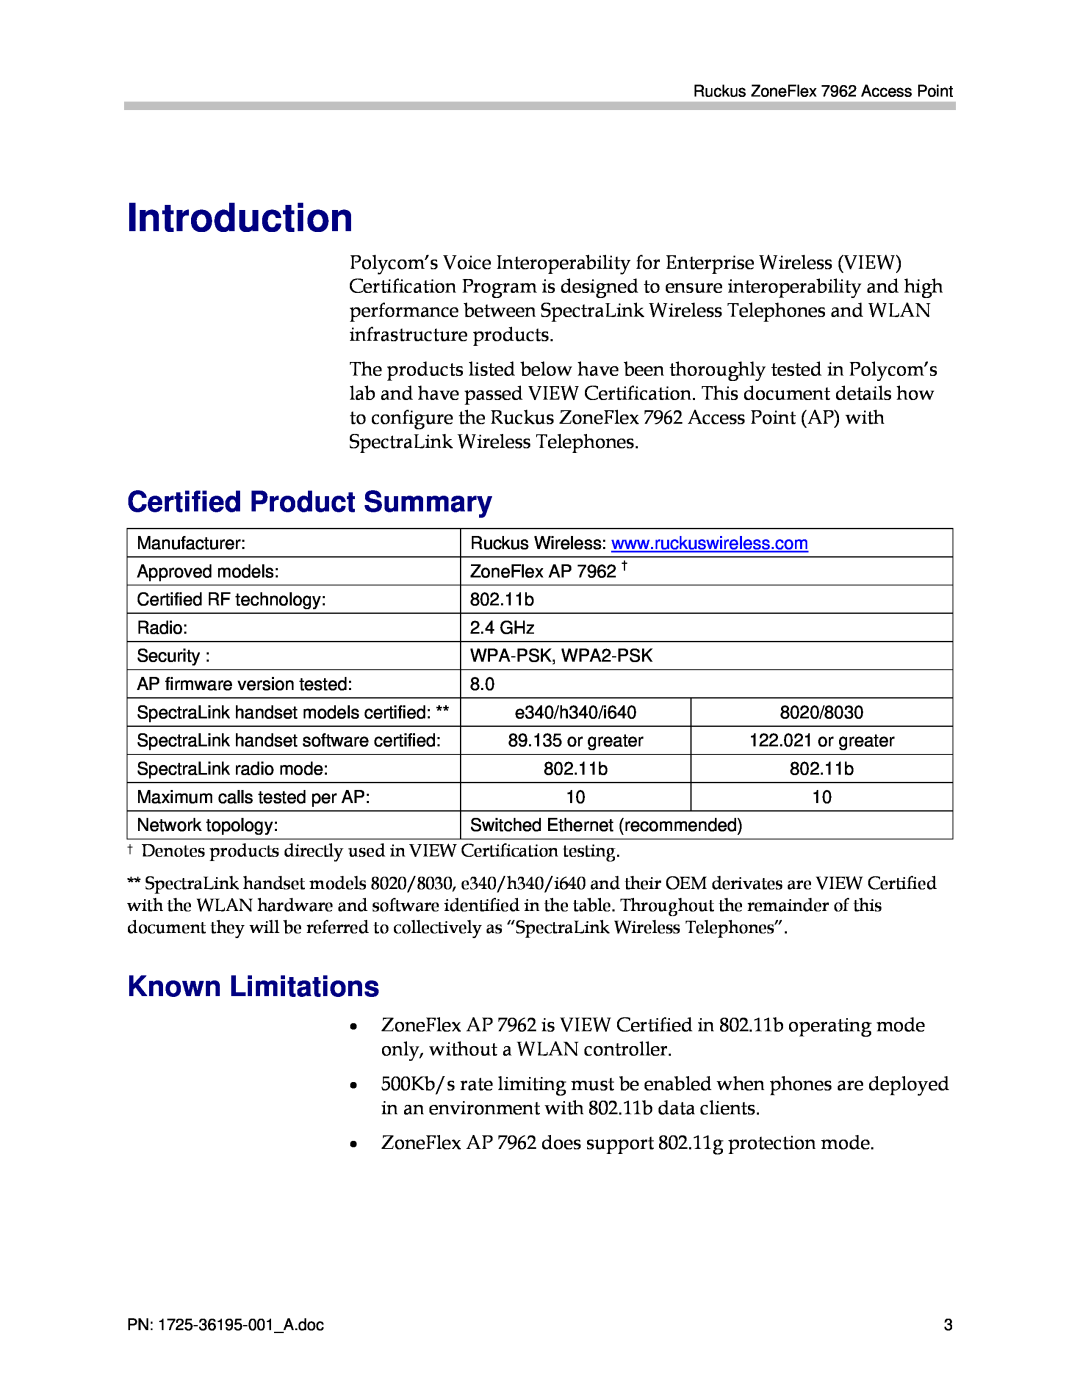 Polycom 7962 manual Introduction, Certified Product Summary, Known Limitations 